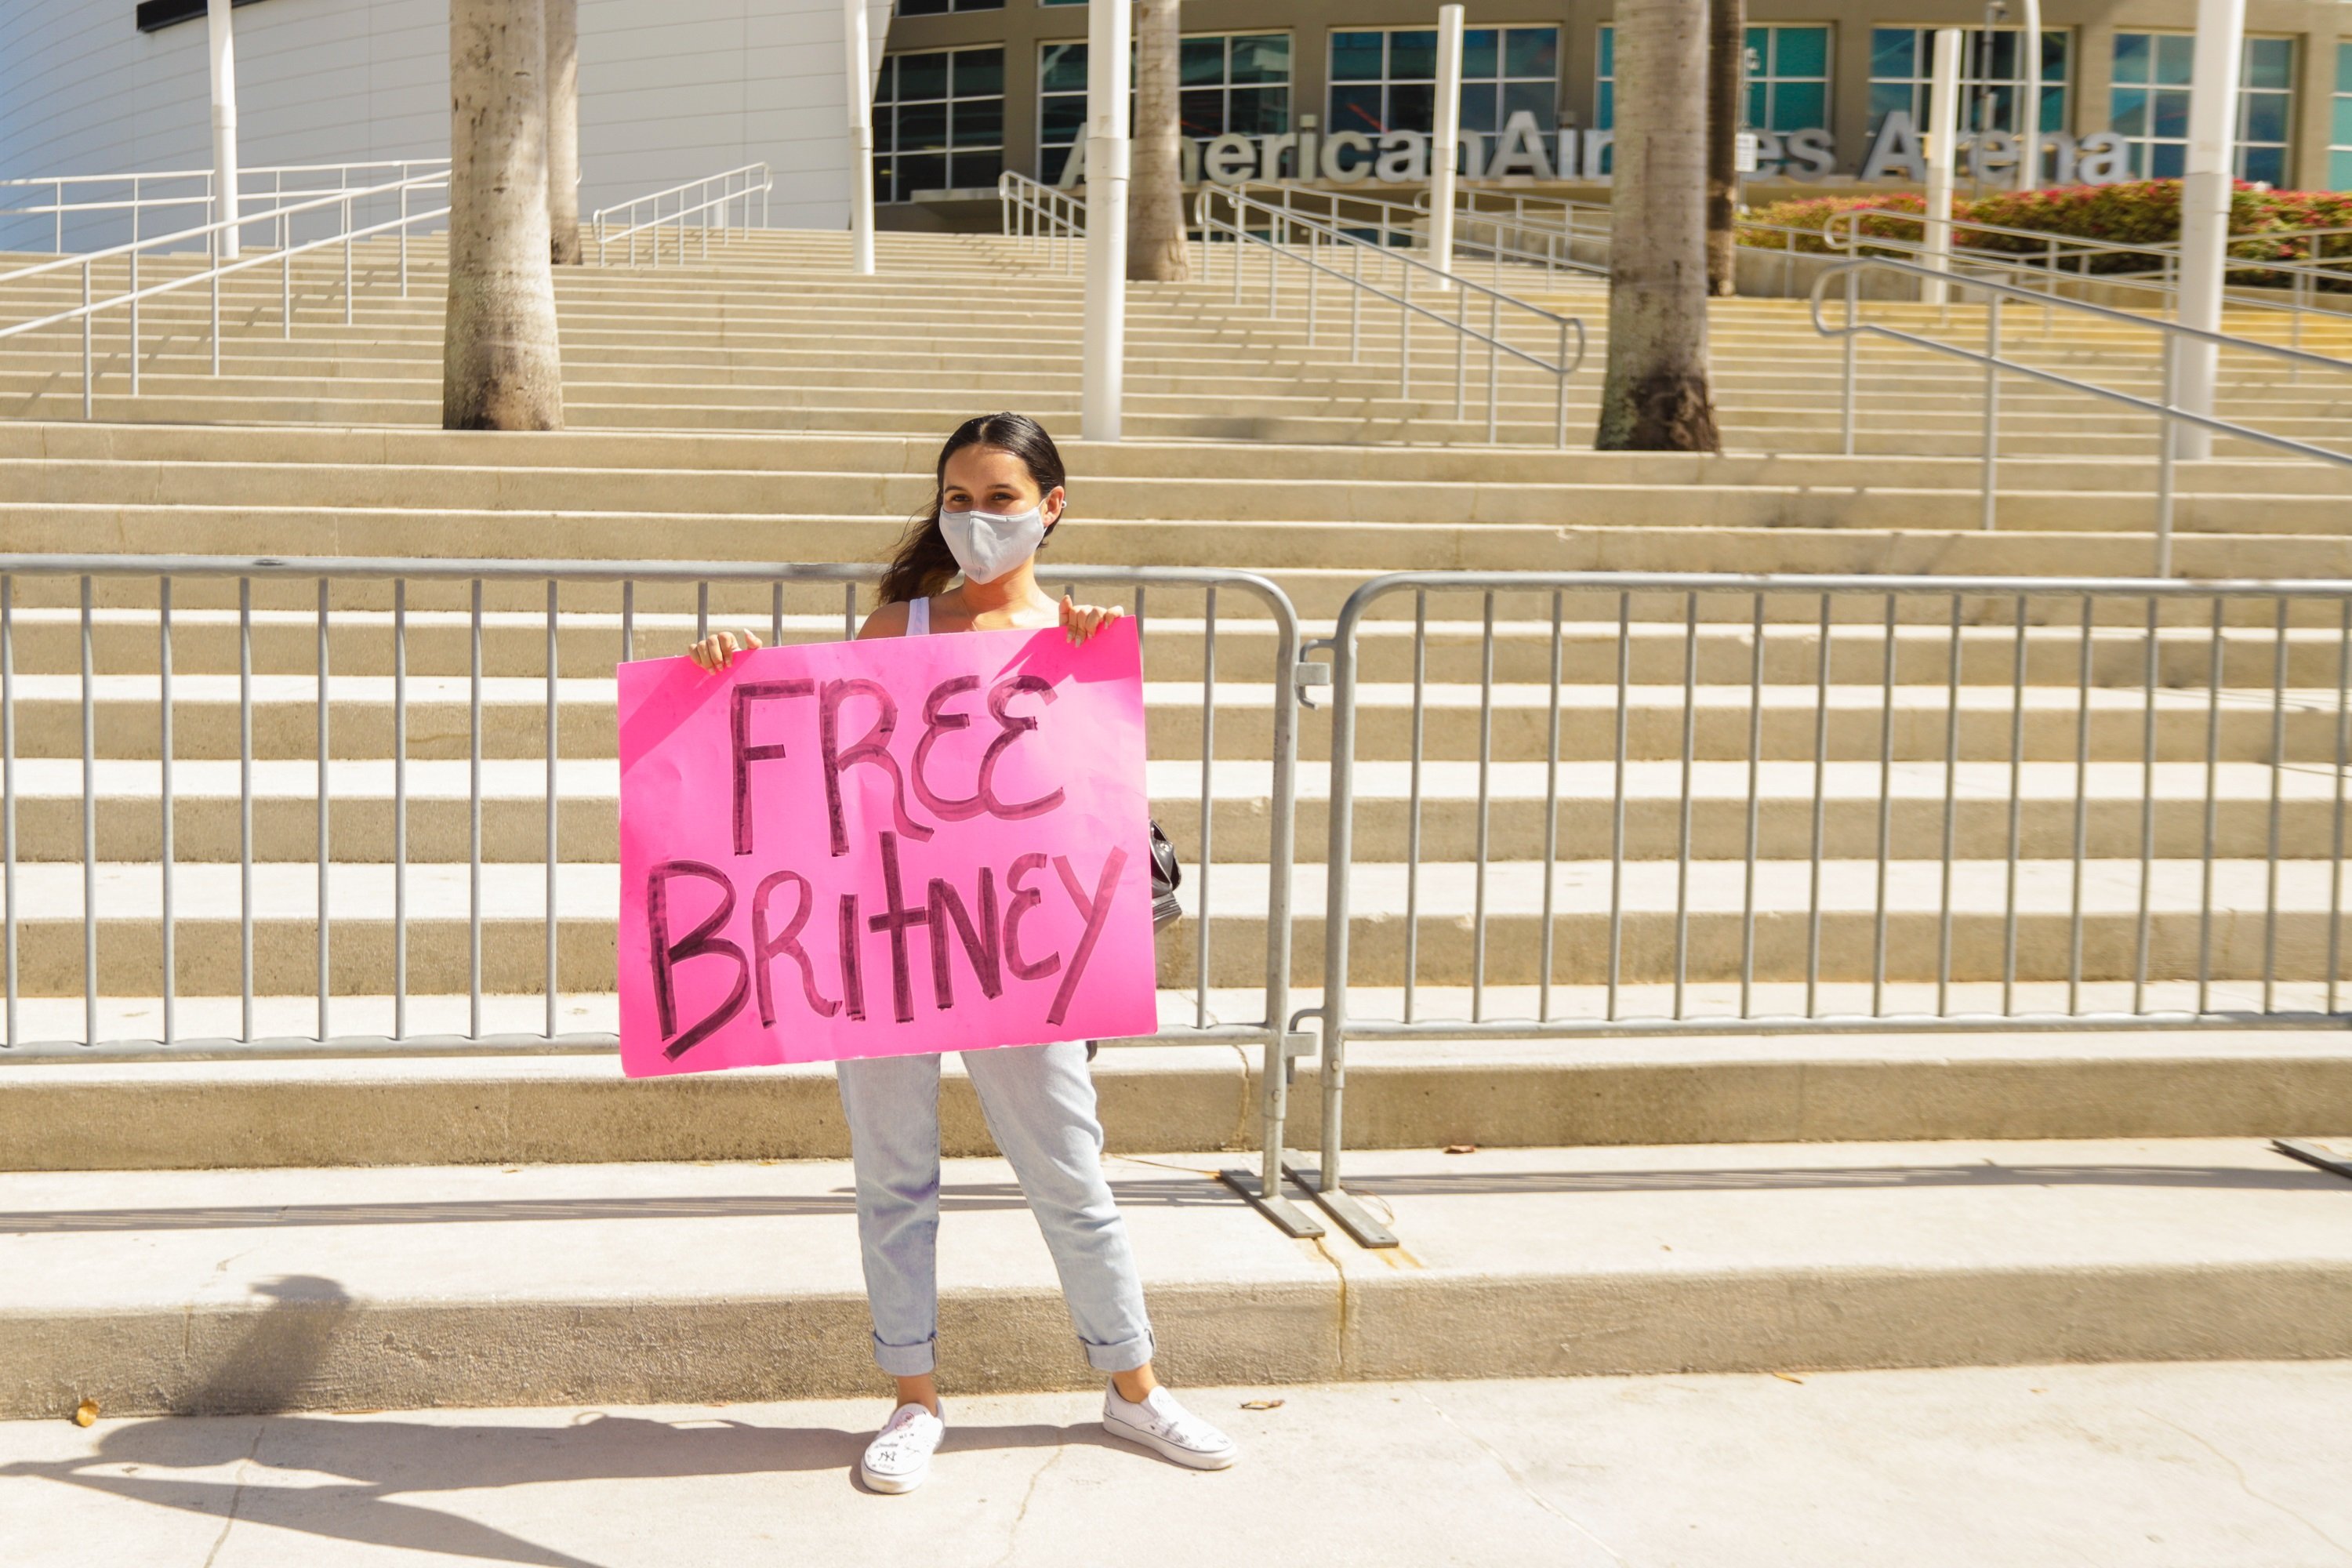 A Free Britney supporter protests Britney Spears' dad's conservatorship over Britney